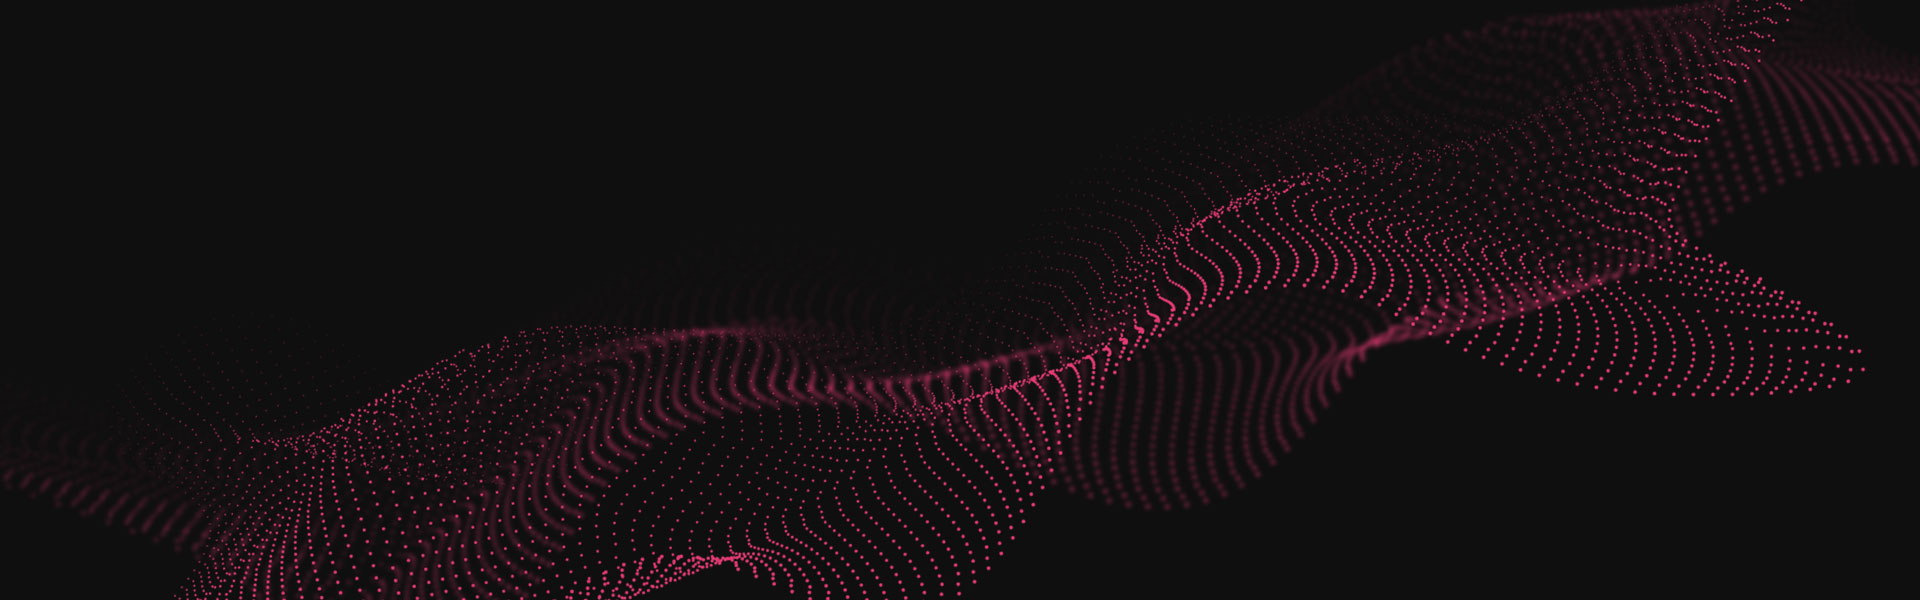 Abstract image featuring a wave of particles. The background is very dark - almost black - and the particles are magenta.